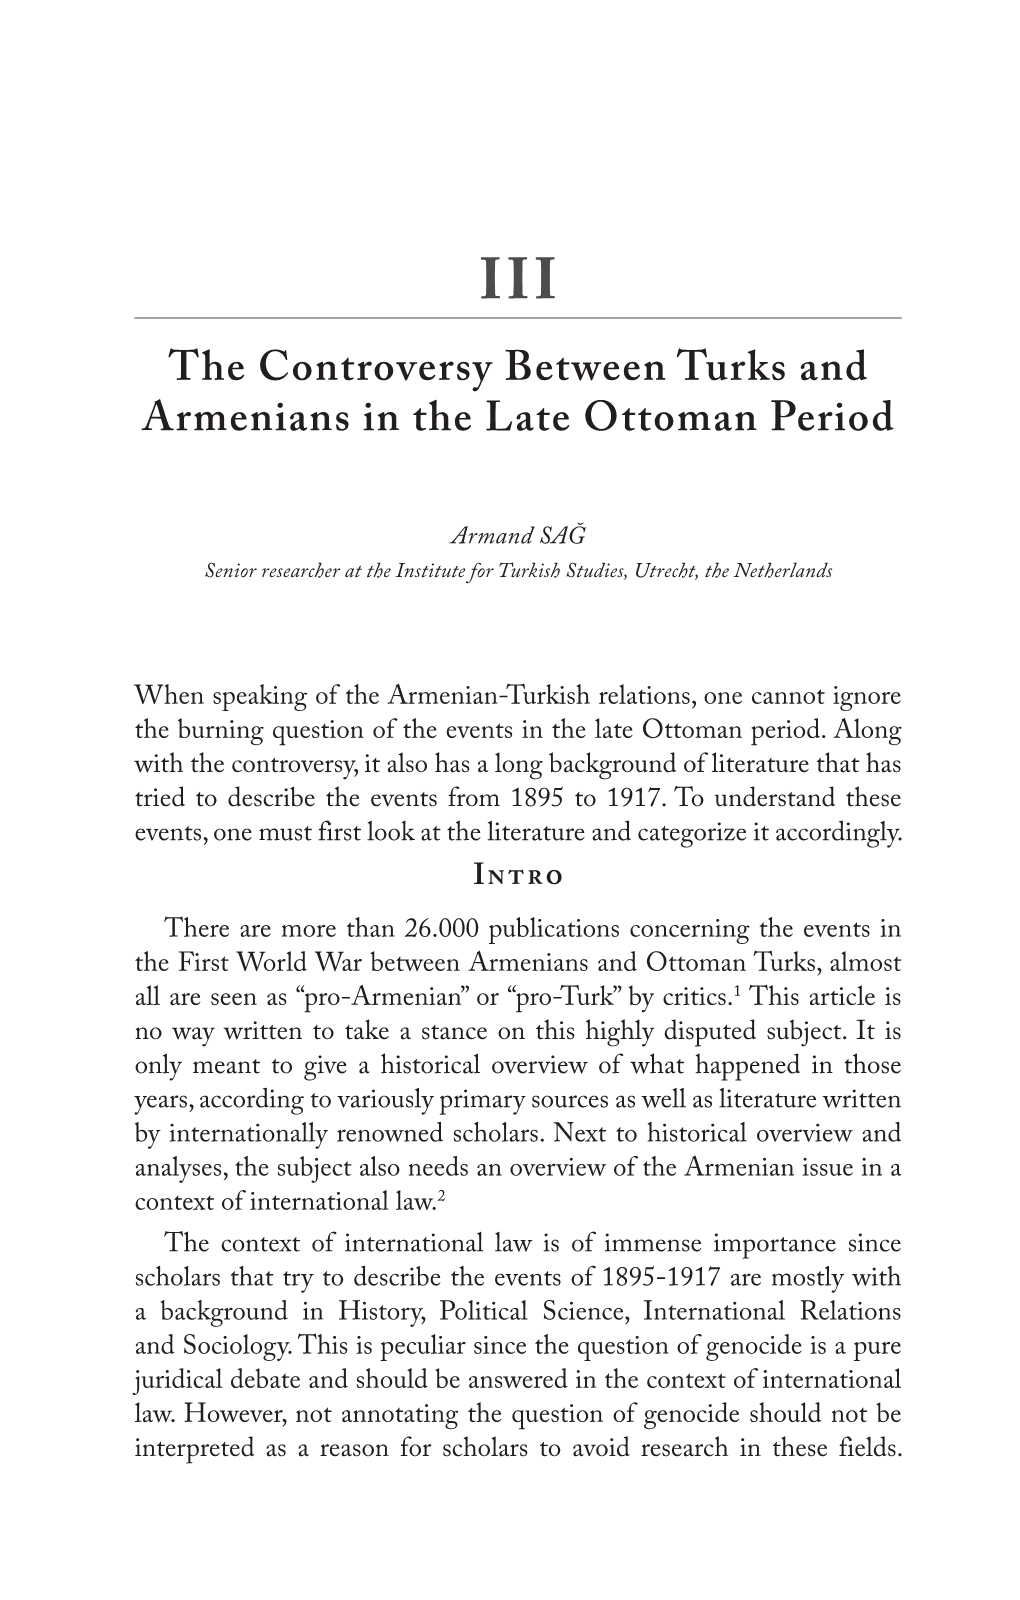 The Controversy Between Turks and Armenians in the Late Ottoman Period